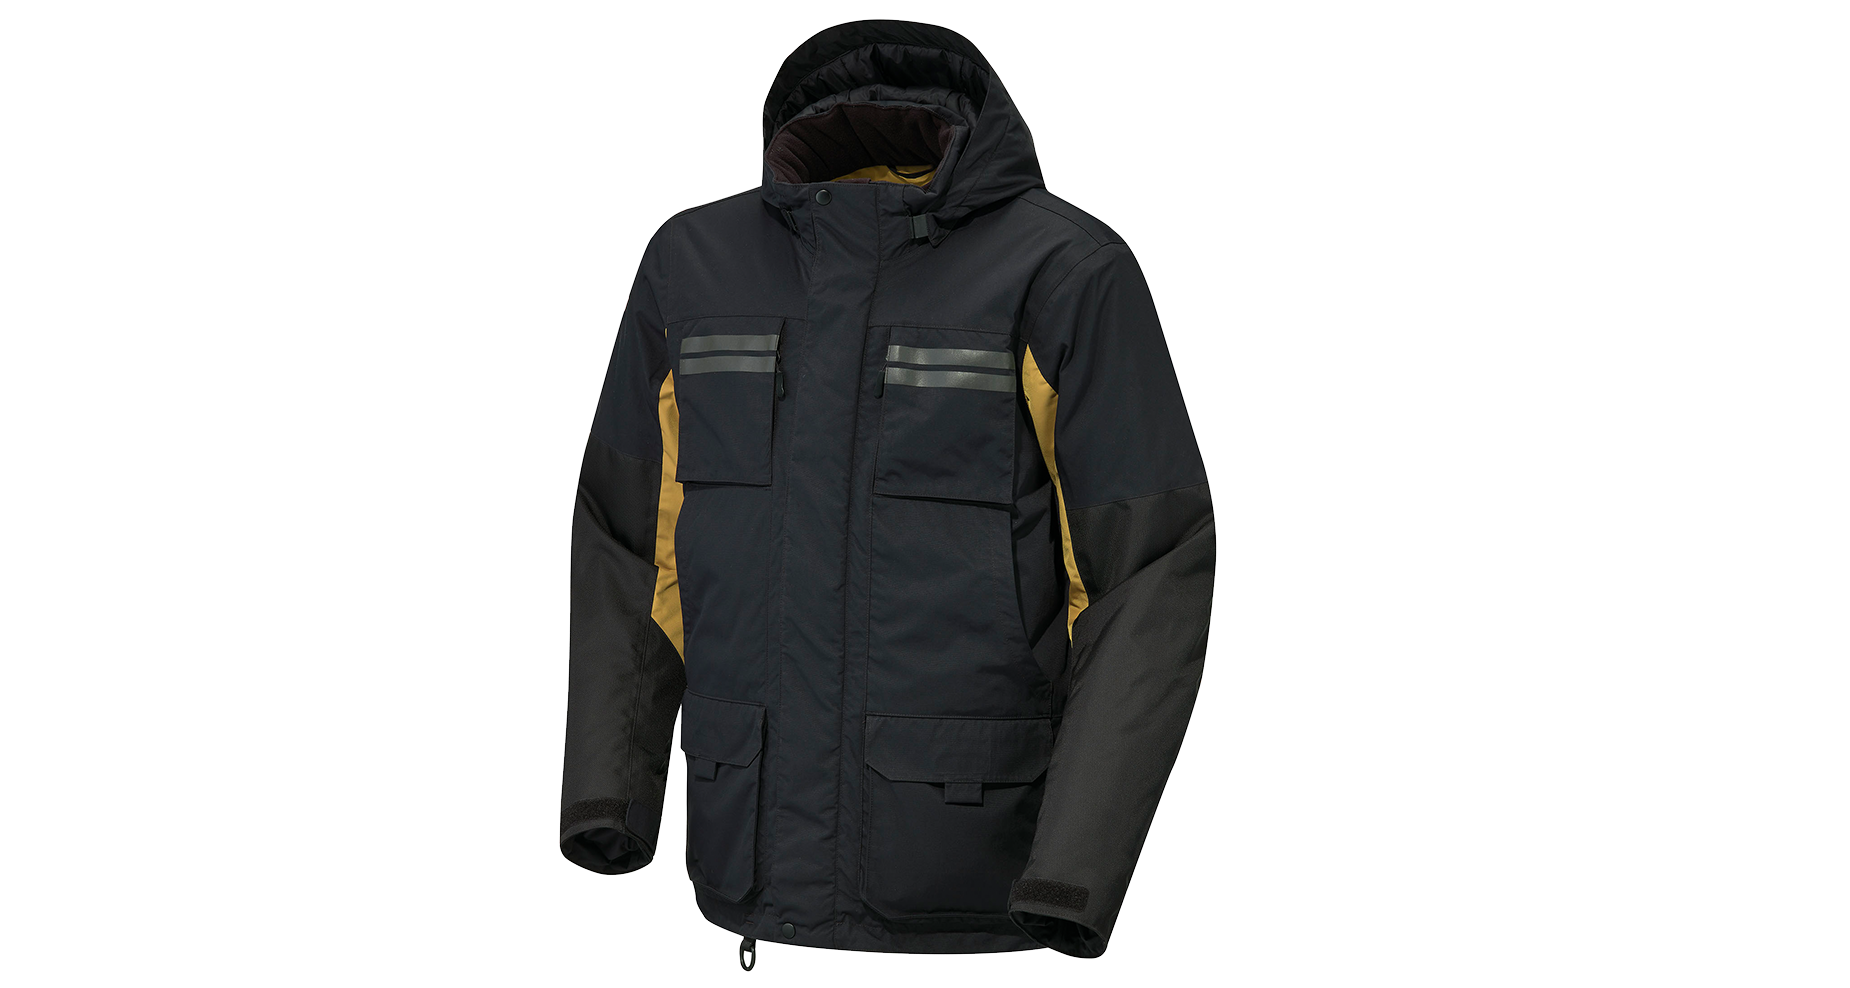 The Expedition Jacket will keep your warm all day whether you are working or having fun.